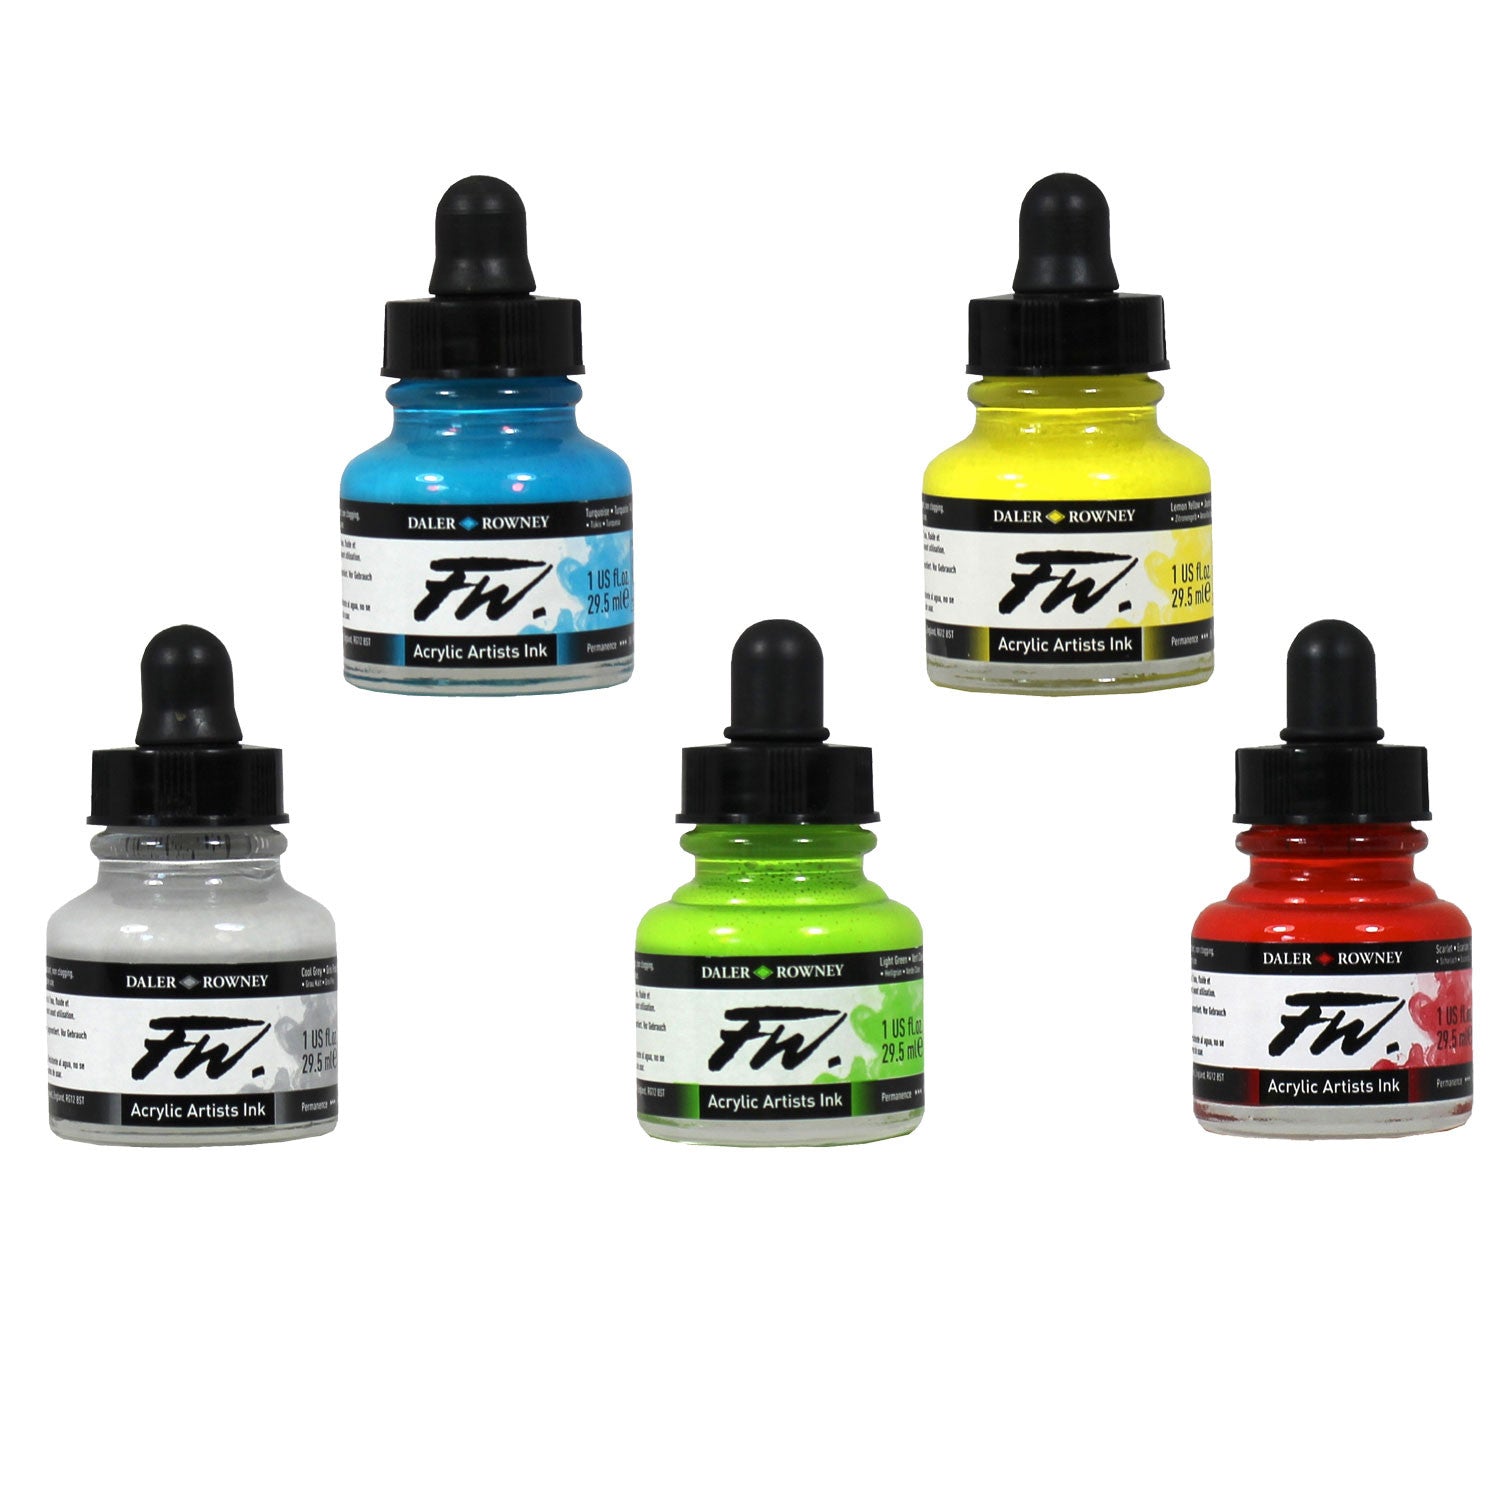 Daler Rowney Black India Ink 29.5ml - The Color Factory